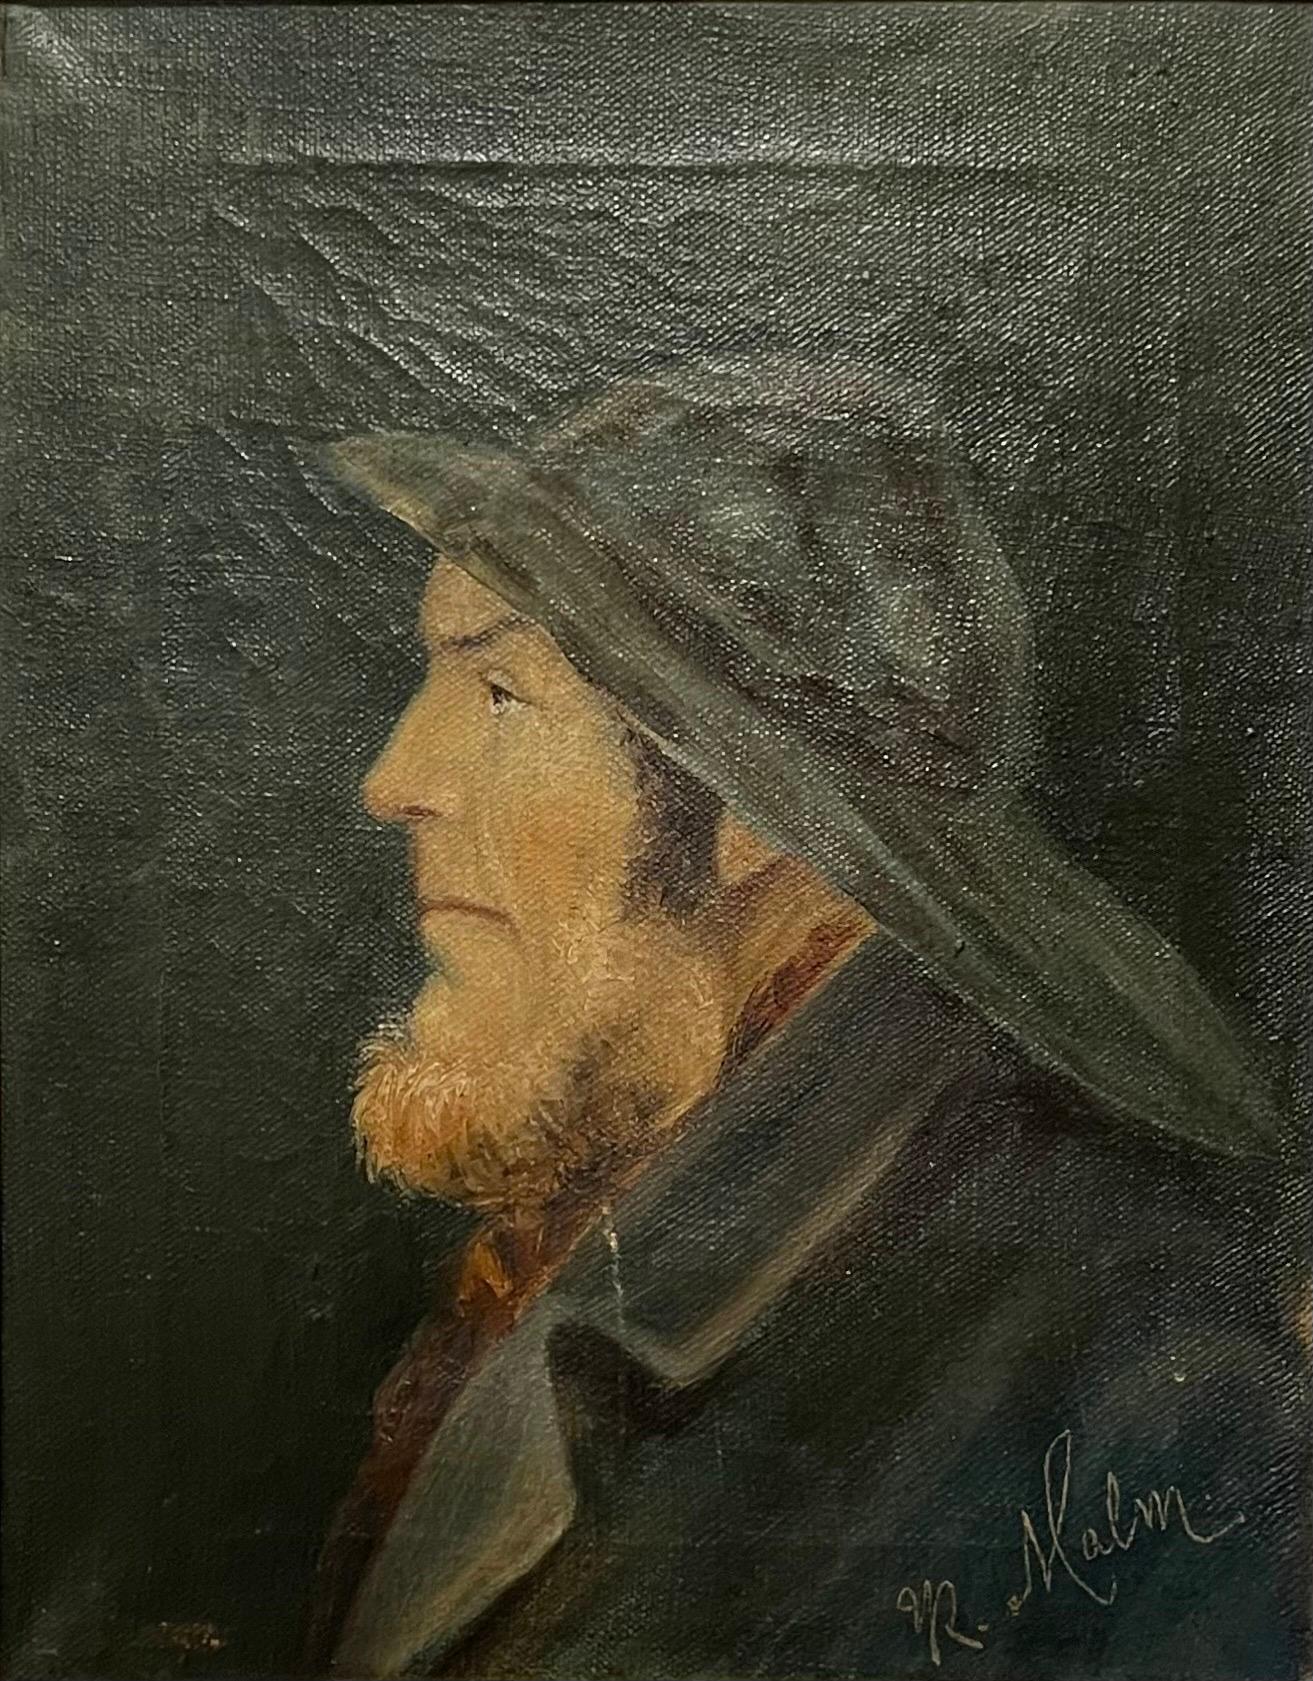 This is an exclusive original oil on canvas painting signed R. Malm. The painting is estimated to be from the early 20th century and has a motive of a fisherman. This motive was very popular amongst the painters of Skagen.
It is framed in a gold